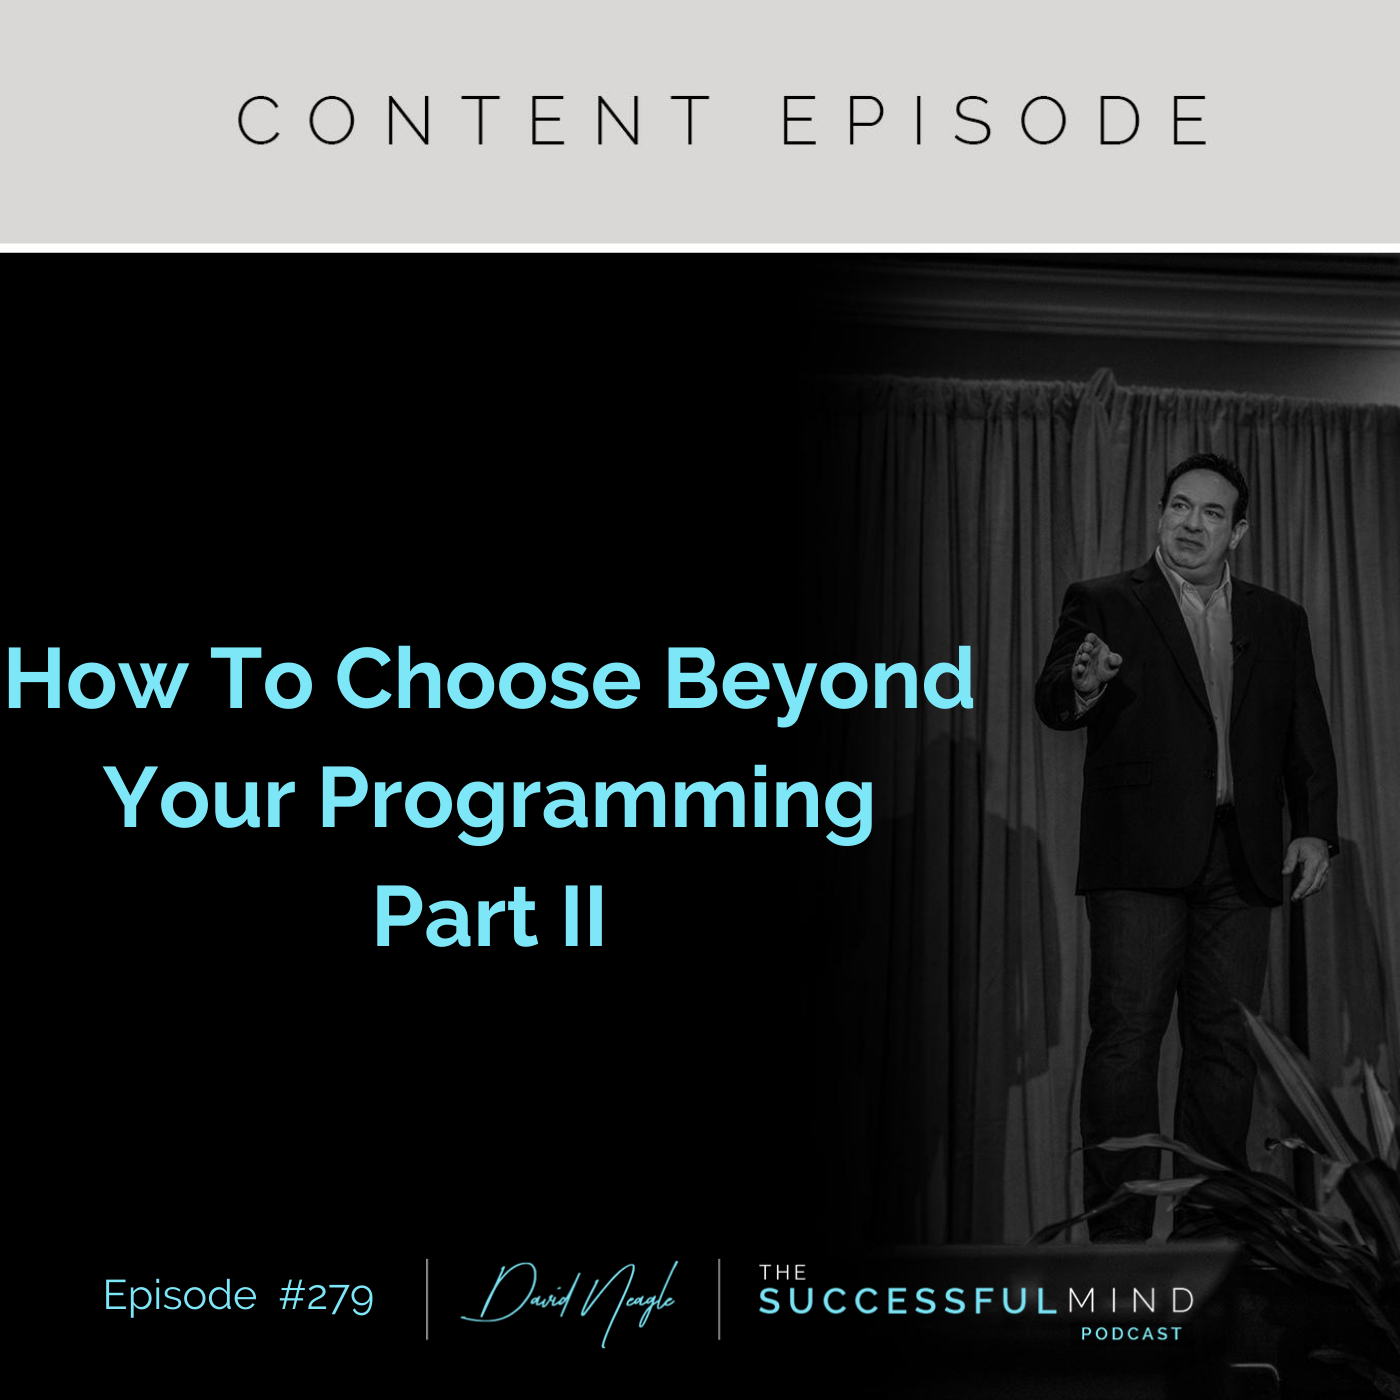 Successful Mind Podcast- Episode 279. The power of choice and how to choose beyond your programming